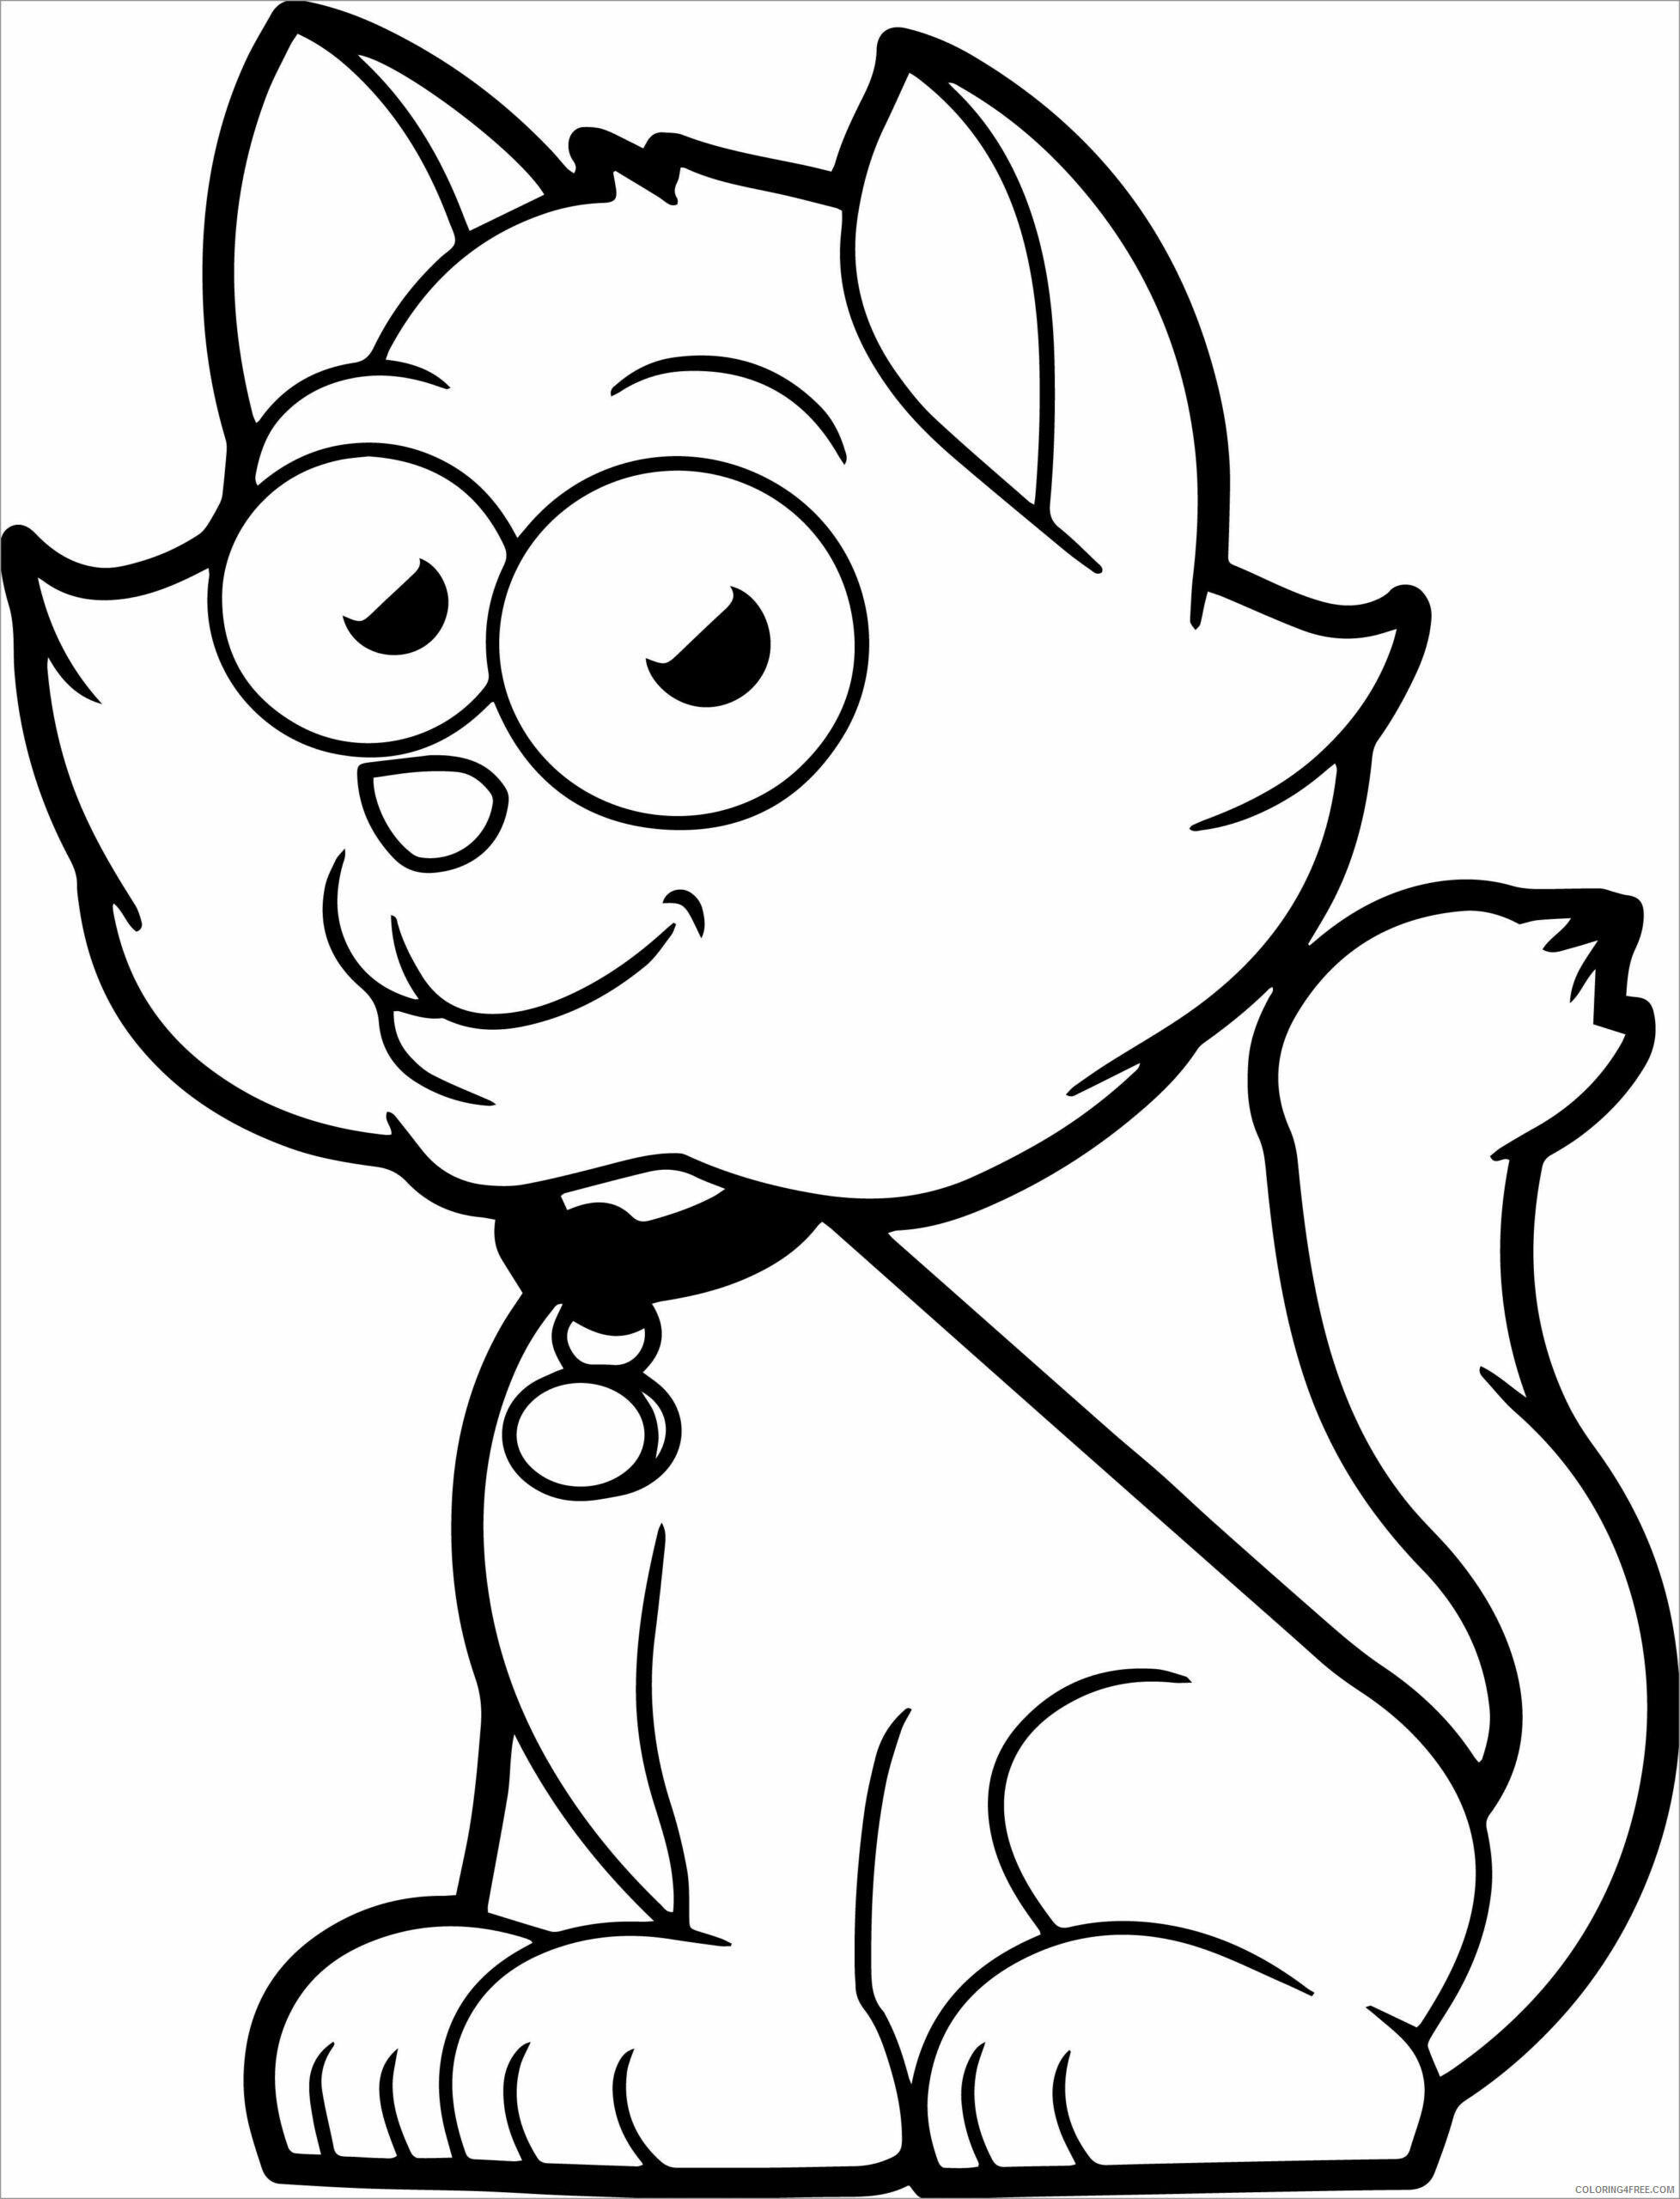 Cat Coloring Pages Animal Printable Sheets cute cartoon cat 2021 0869 Coloring4free